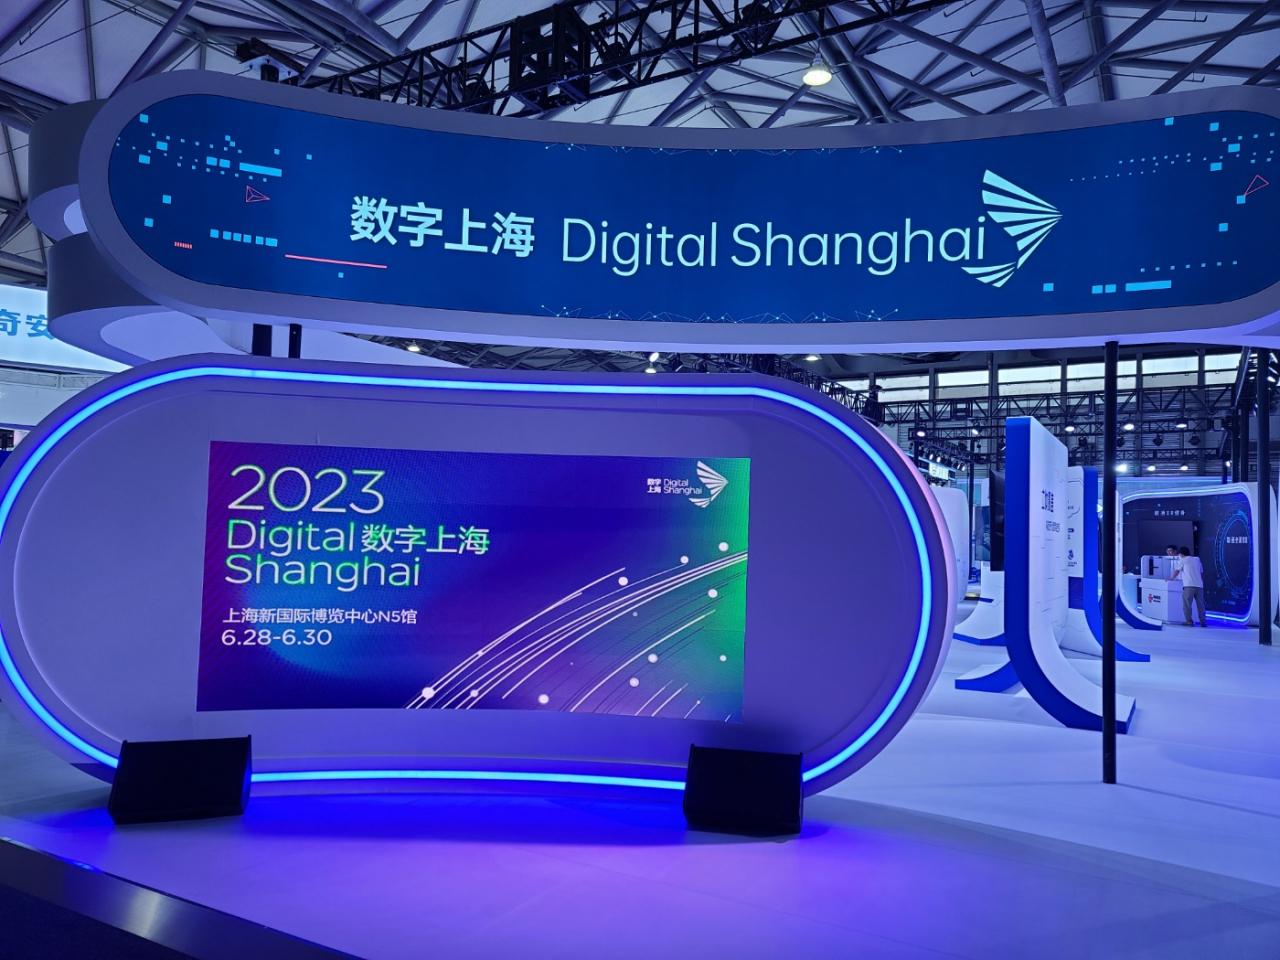 Marking the 10th anniversary, the MWC Shanghai sets up a separate exhibition hall, 